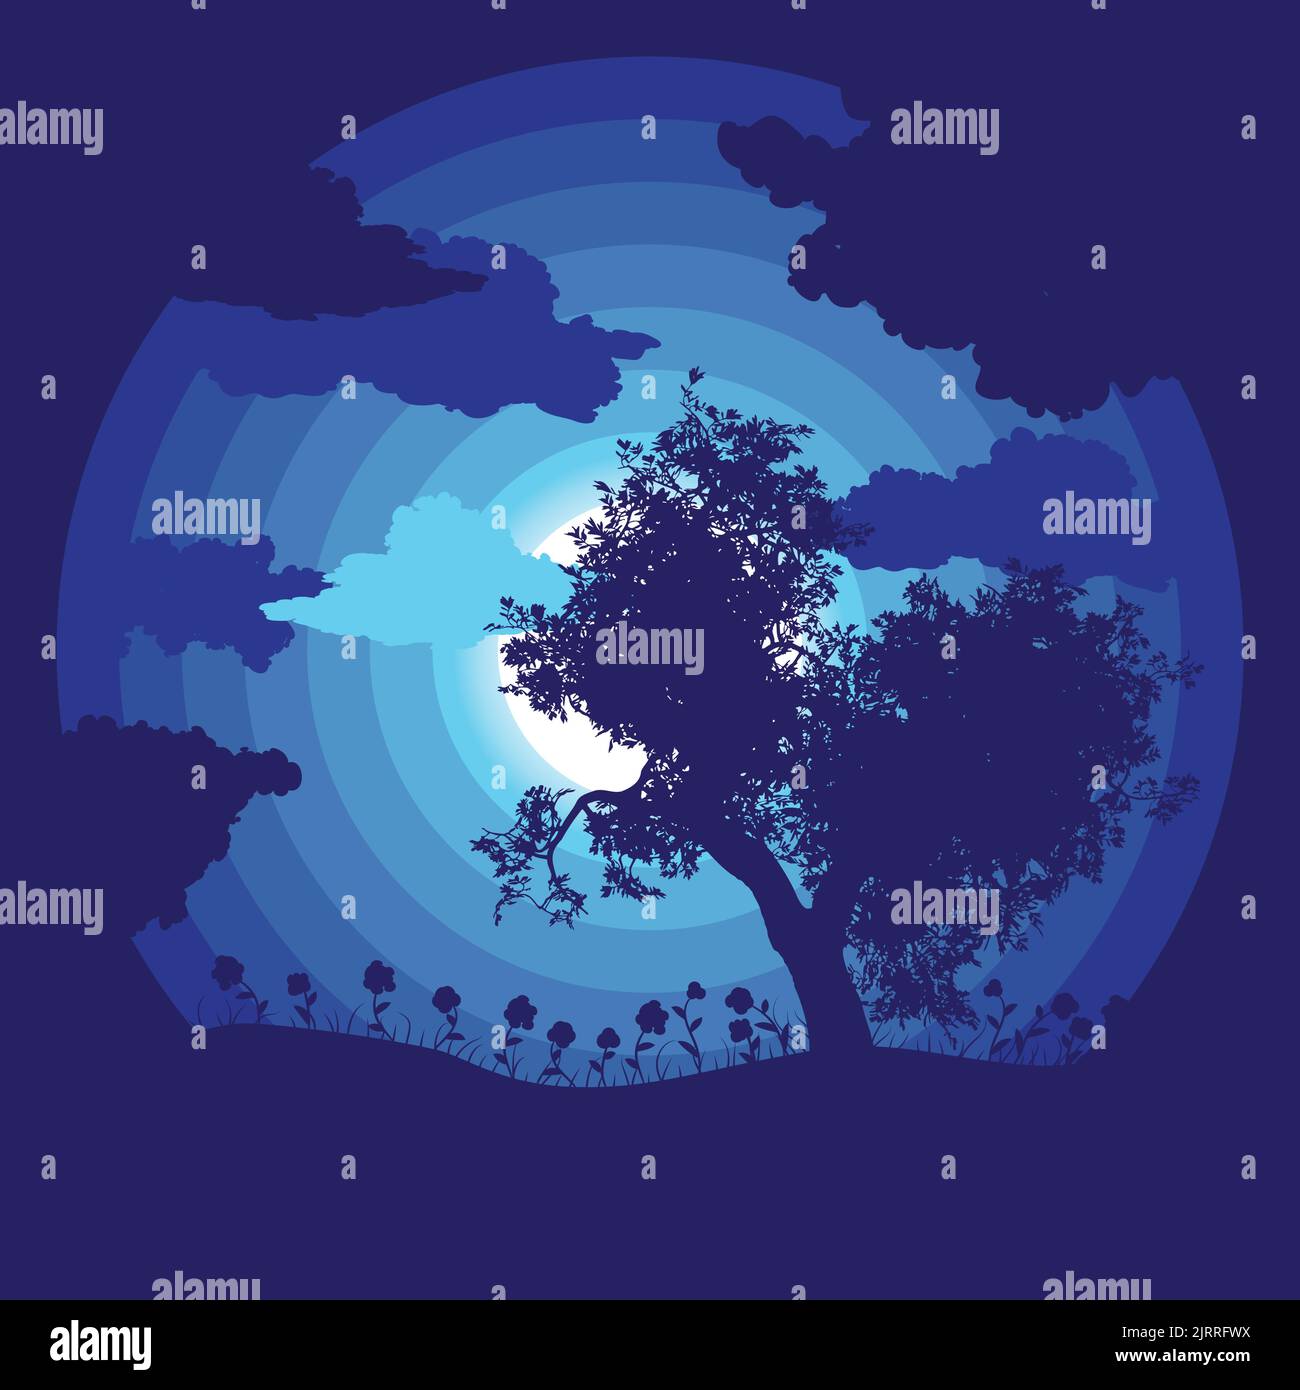 Dark night landscape with tree and grass silhouette illustration. Stock Vector